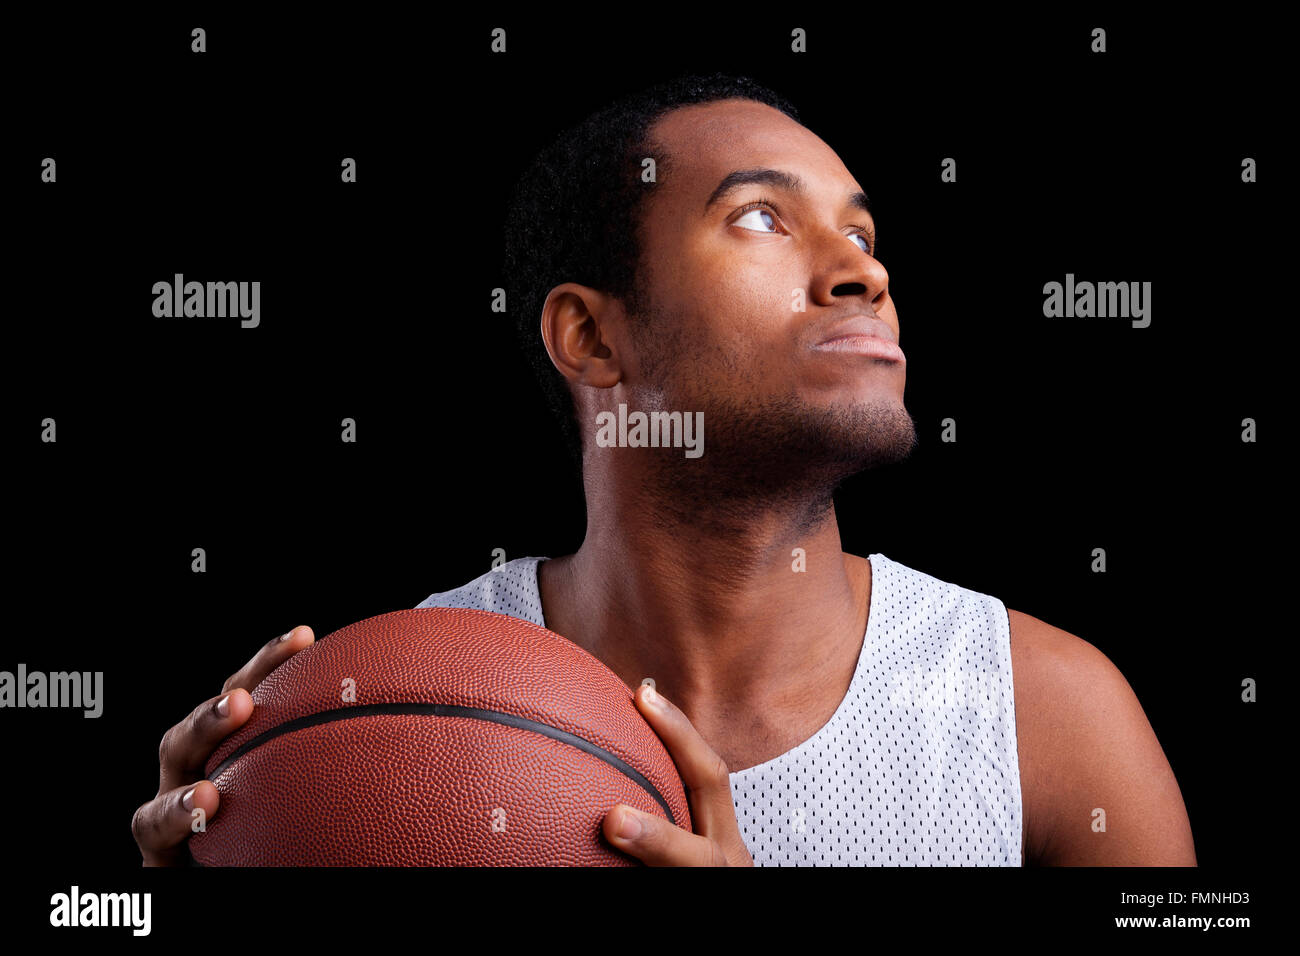 Basketball player with ball against dark background Stock Photo